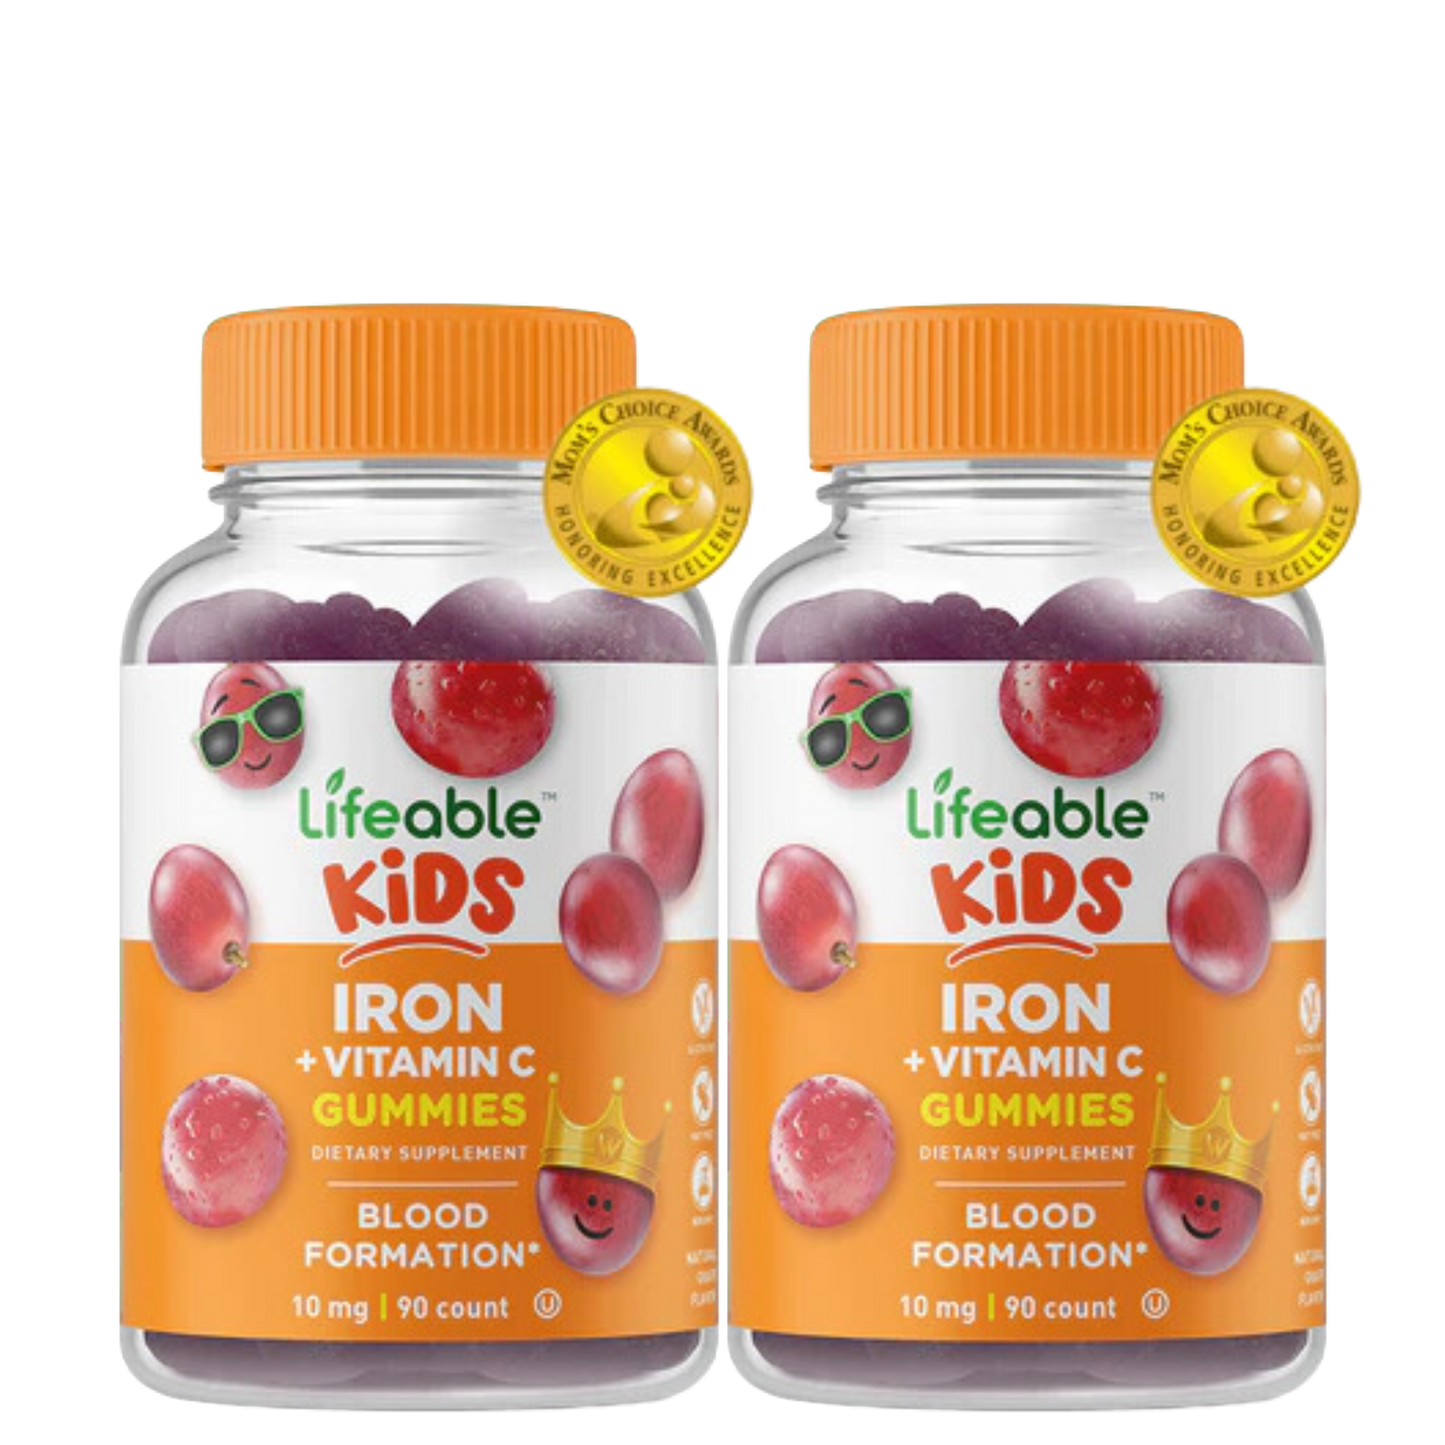 Iron and Vitamin C Gummies for Kids